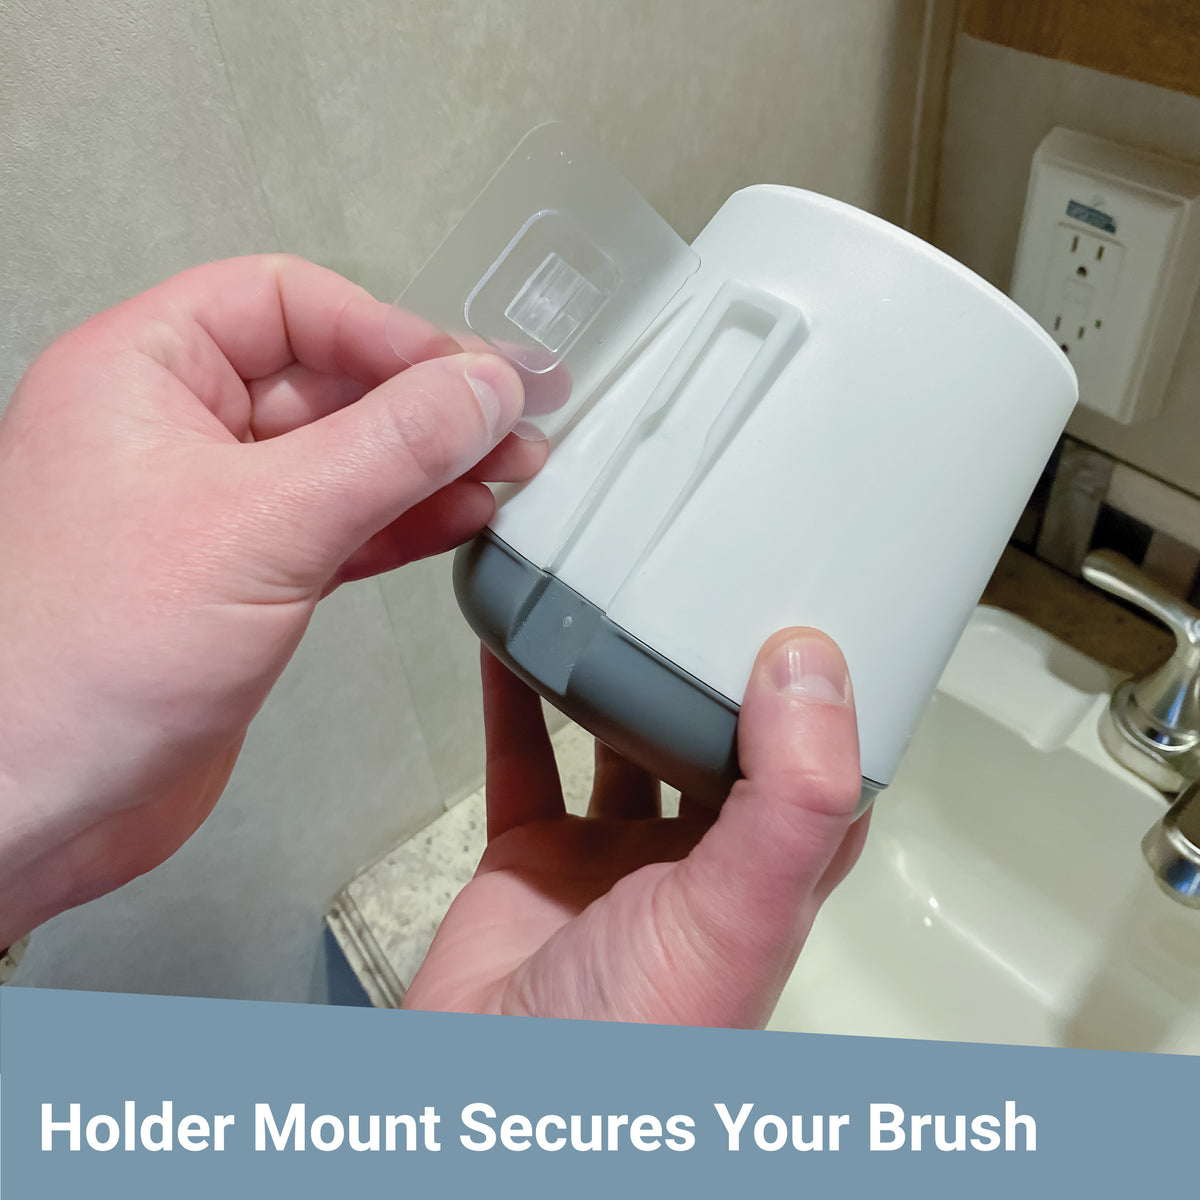 RV Toilet Brush holder mounts to wall so there is no shifting during travel.